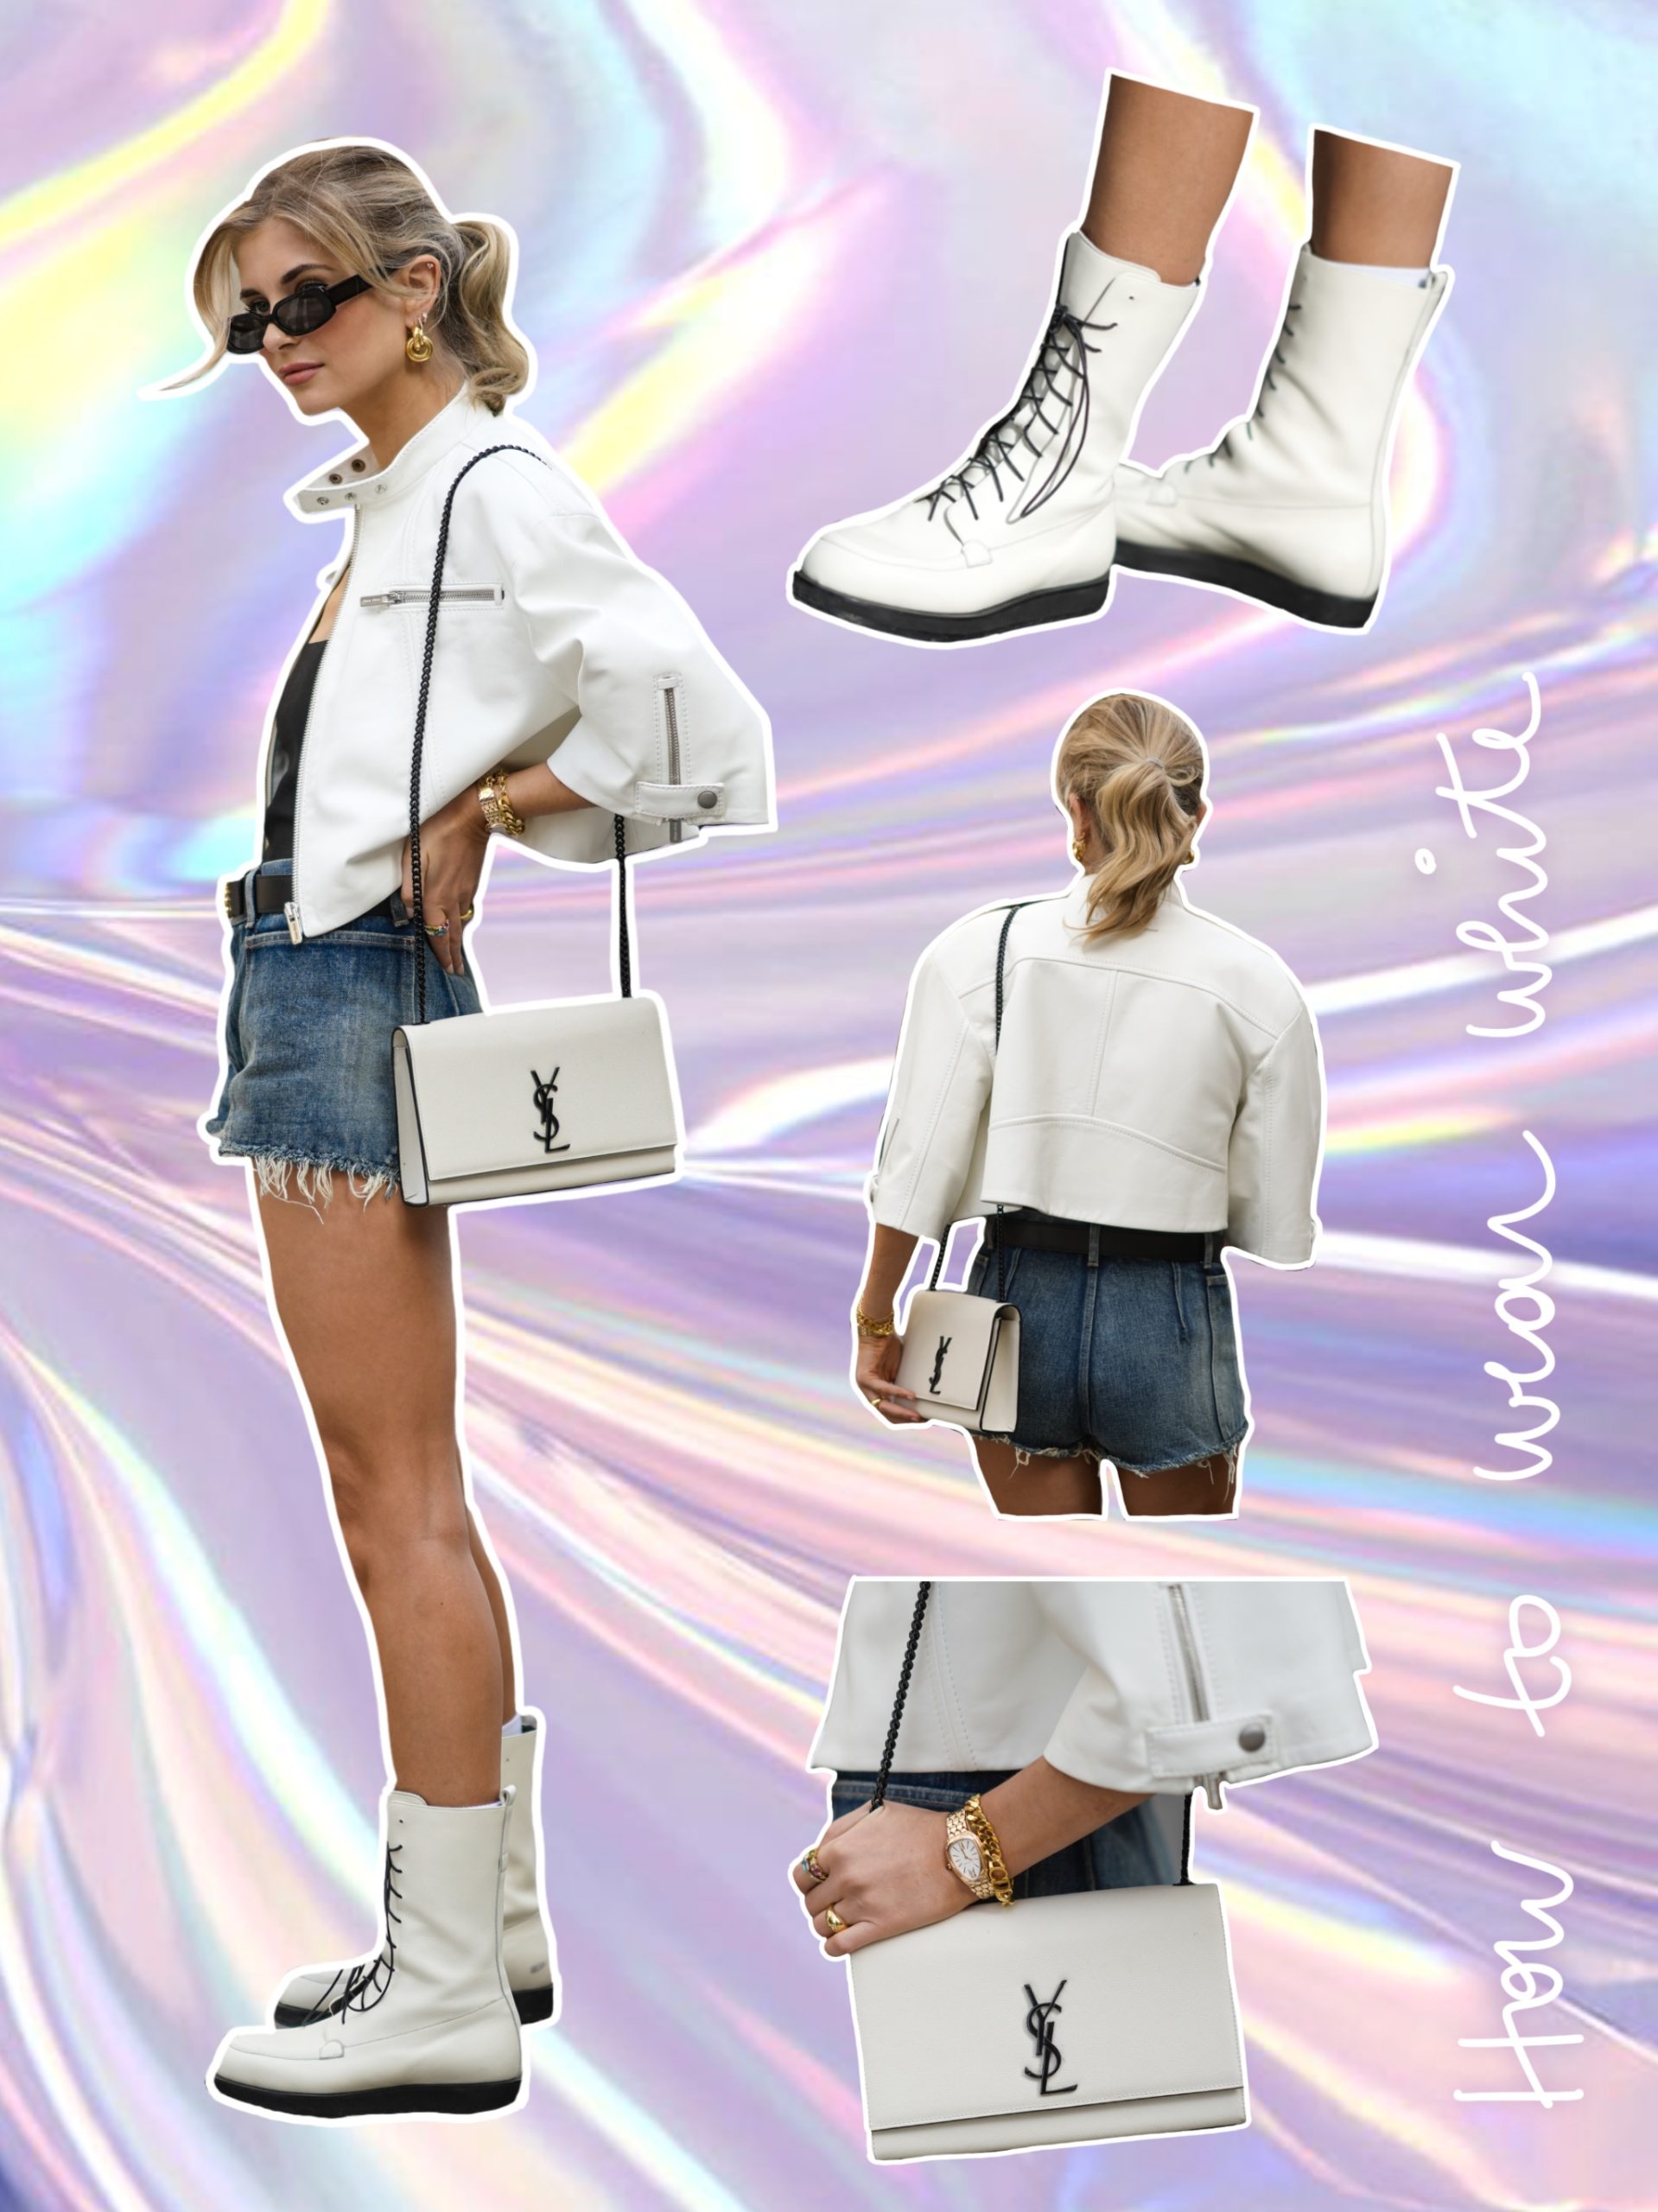 Xenia Adonts wearing Saint Laurent denim shorts, white boots, a white YSL bag and a white Miu Miu leather jacket